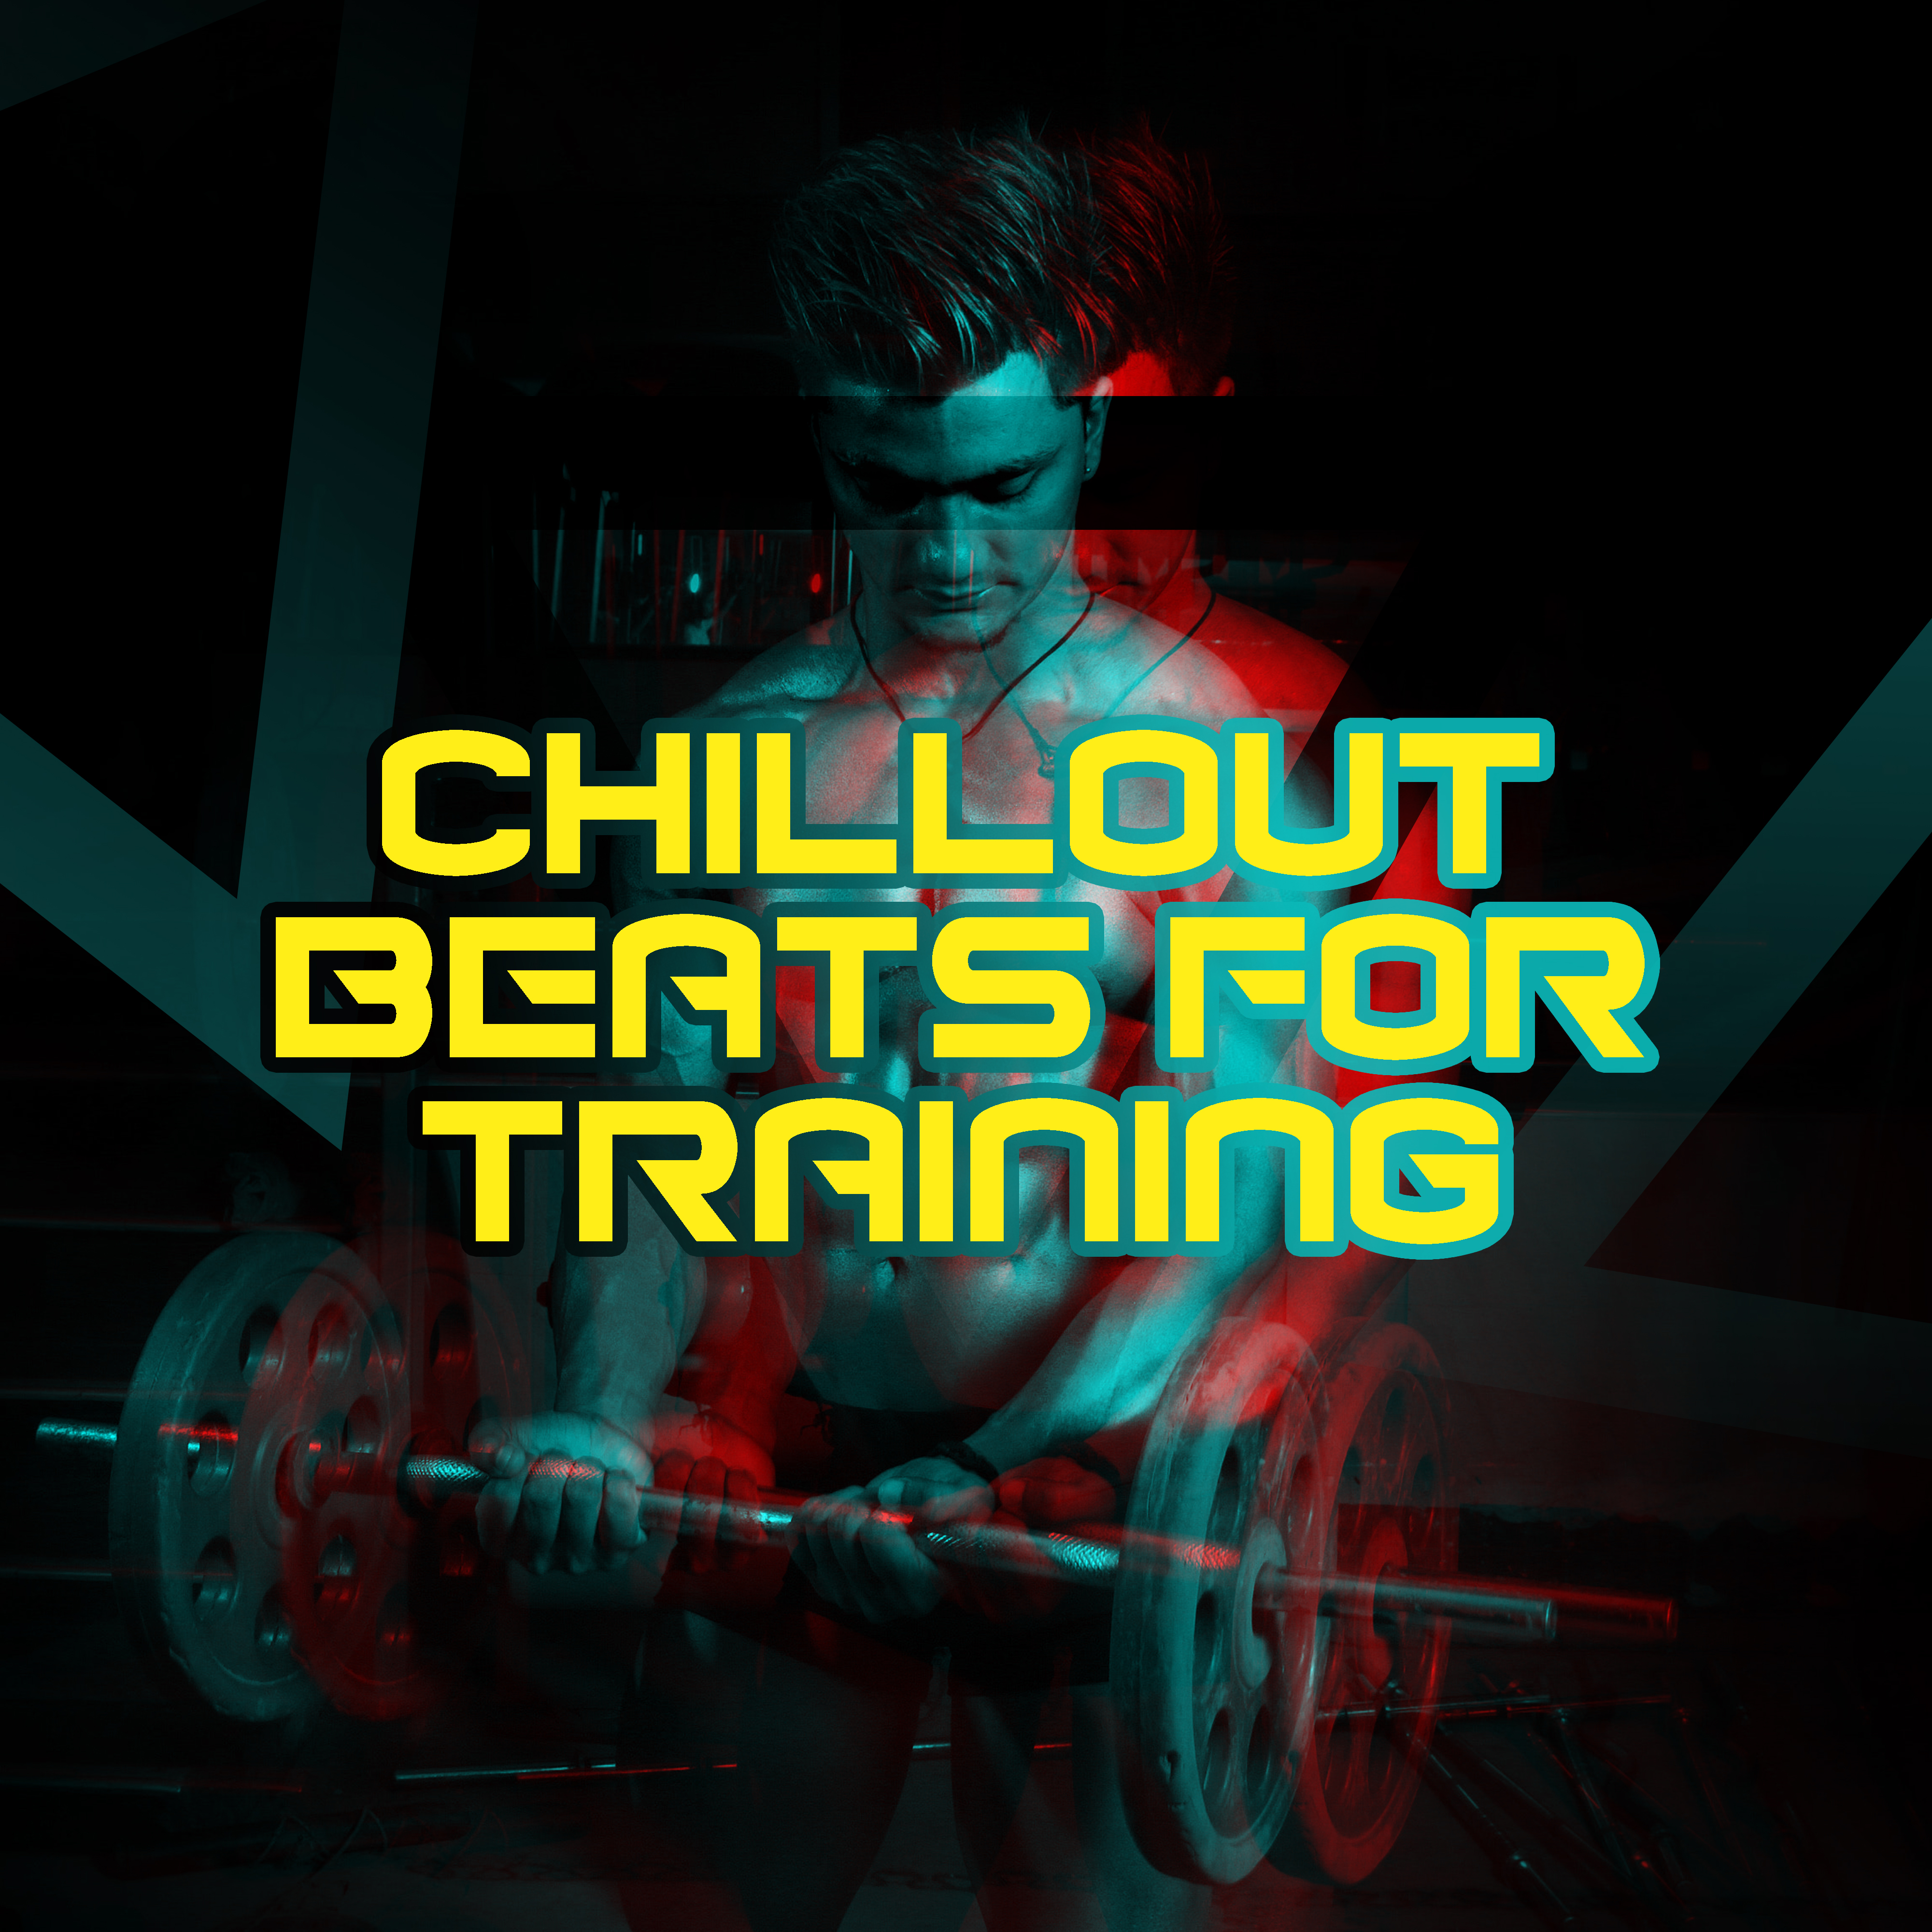 Chillout Beats for Training